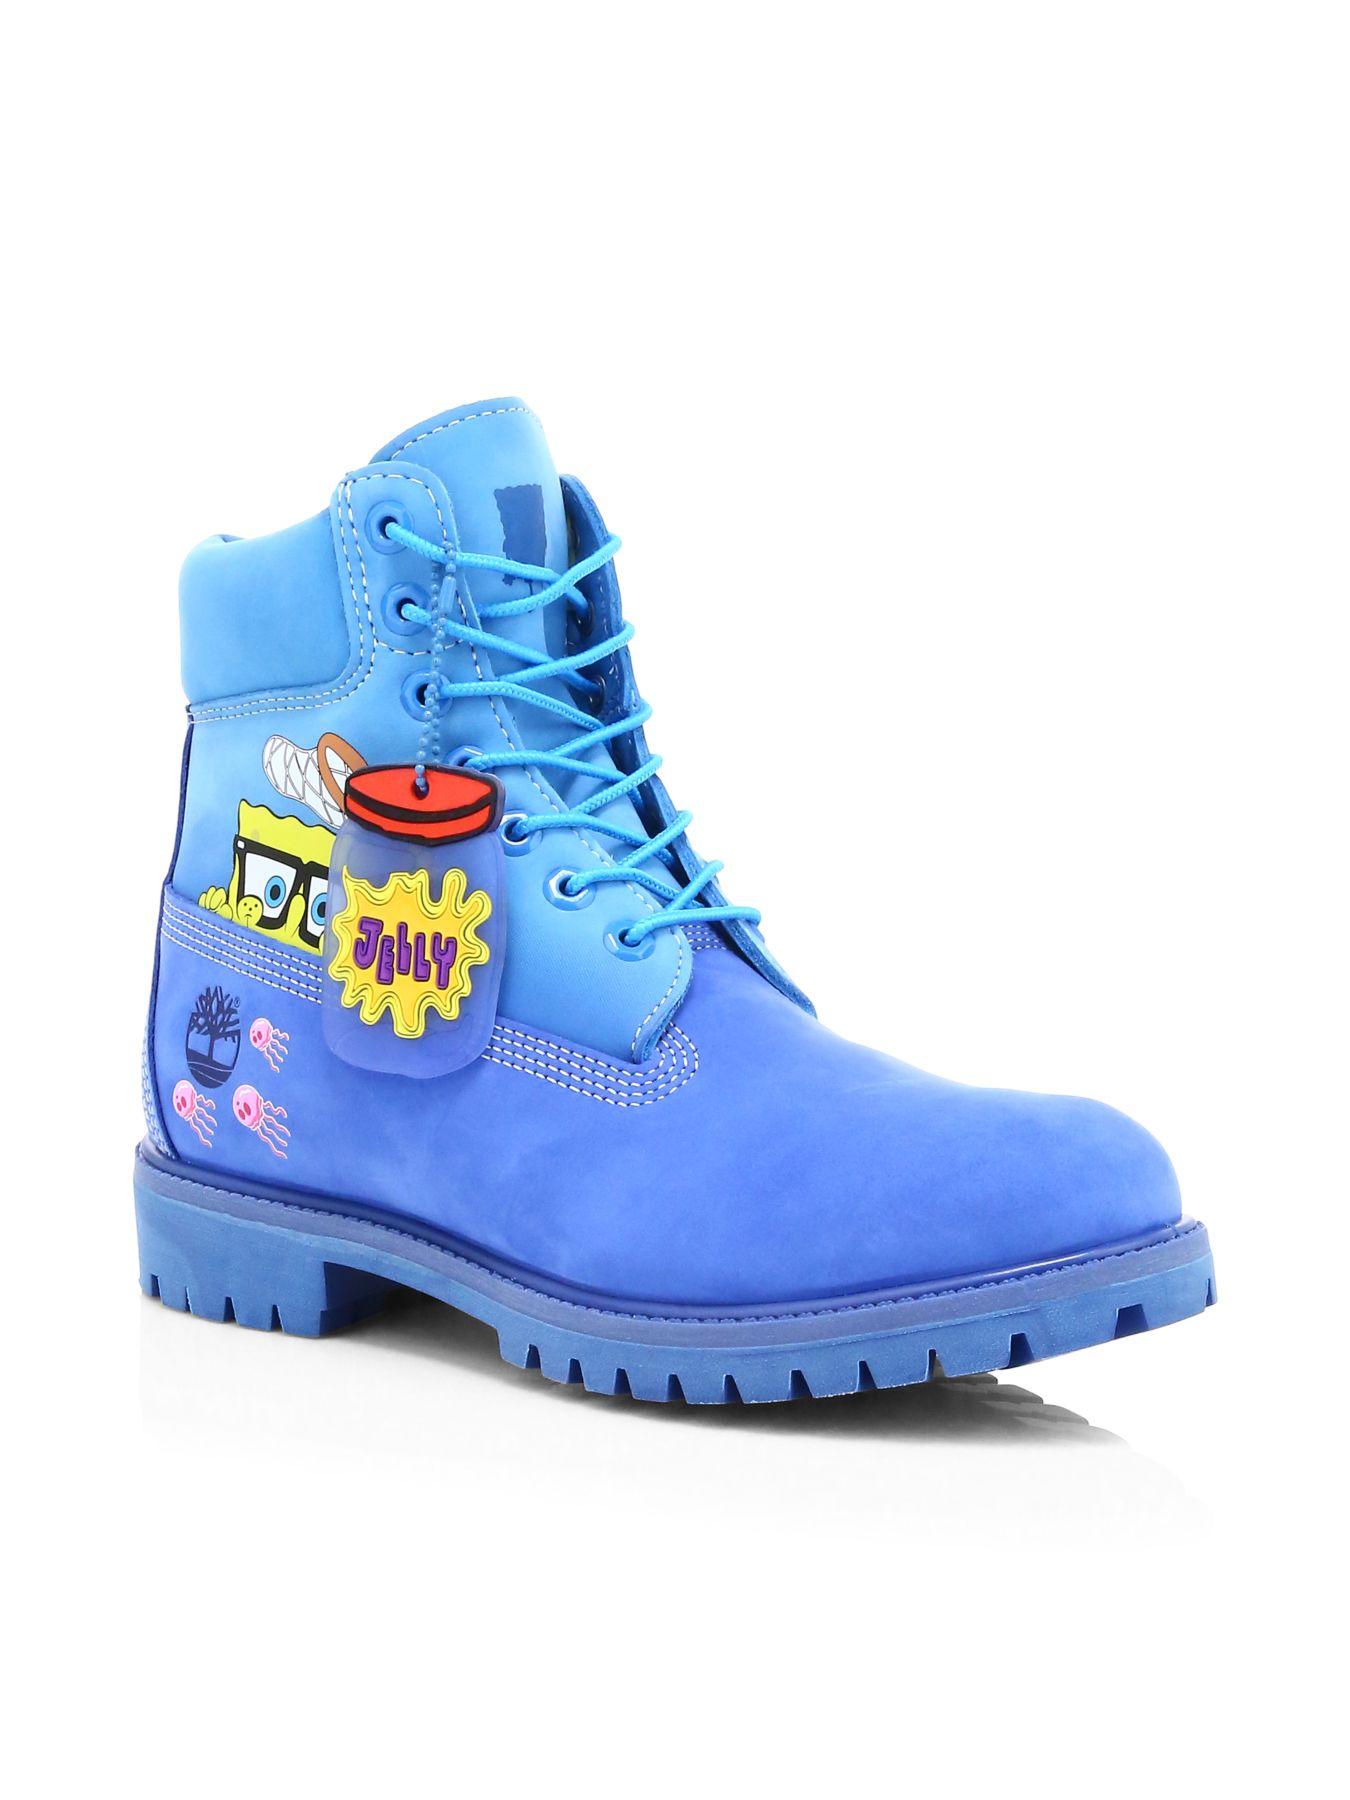 Timberland Premium Spongebob Leather Boots in Bright Blue (Blue) for Men -  Lyst